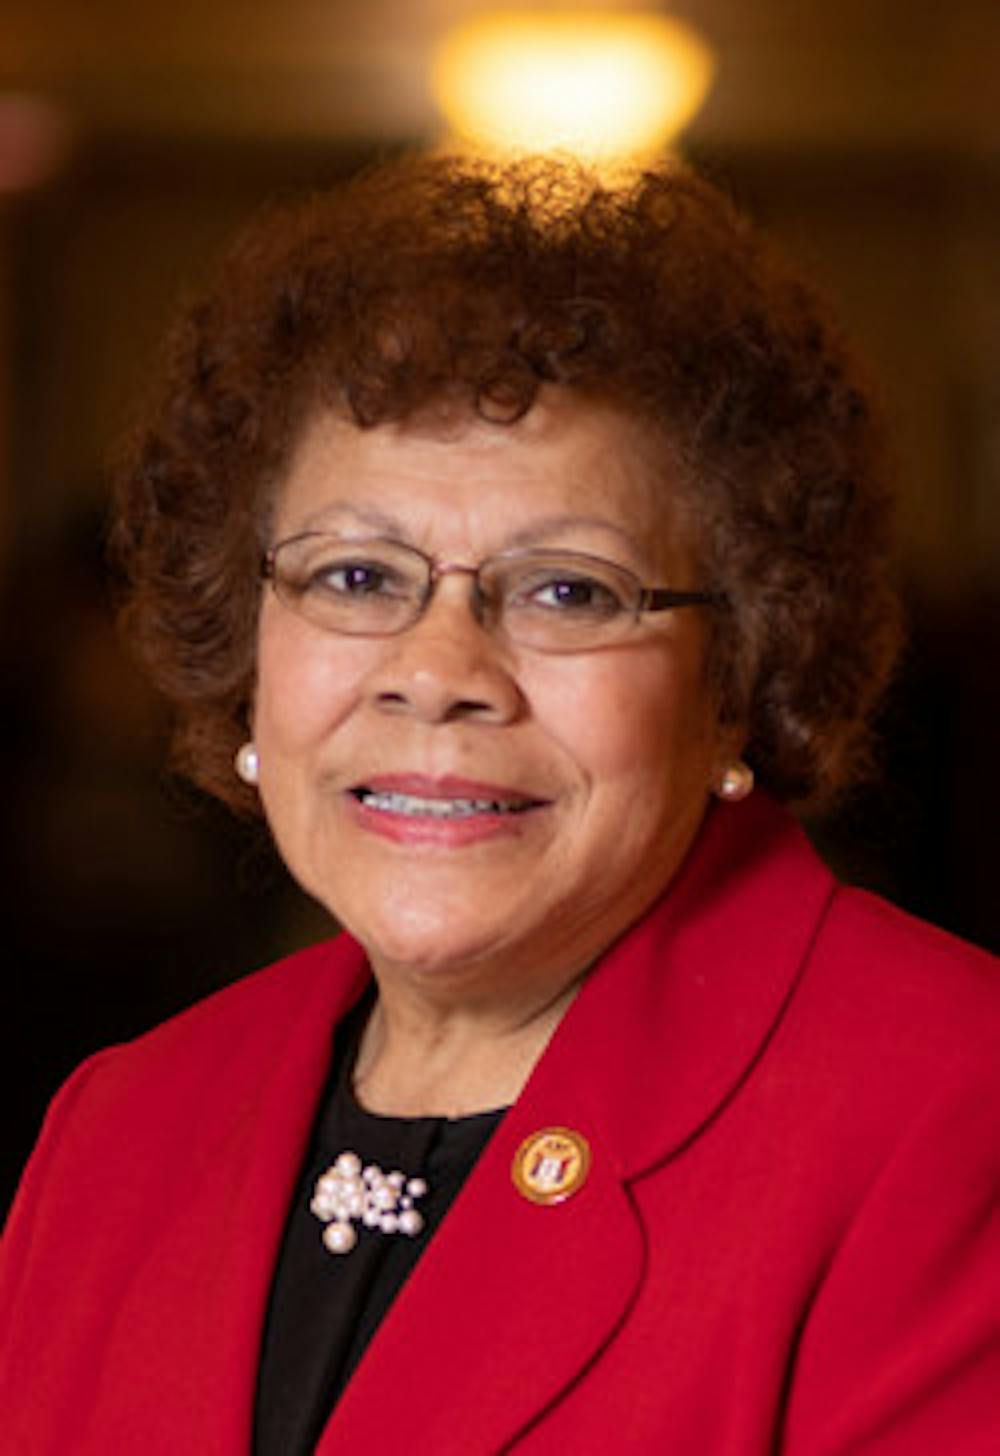 <p><em>As the elections approach on Nov. 7, two prominent contenders have emerged in representing the 15th district in the senate: incumbent Shirley Turner and businessman Roger Locandro. (Photo courtesy of New Jersey Legislature/“</em><a href="https://www.njleg.state.nj.us/legislative-roster/47/senator-turner" target=""><em>Senator Shirley K. Turner (D)</em></a><em>”). </em></p>